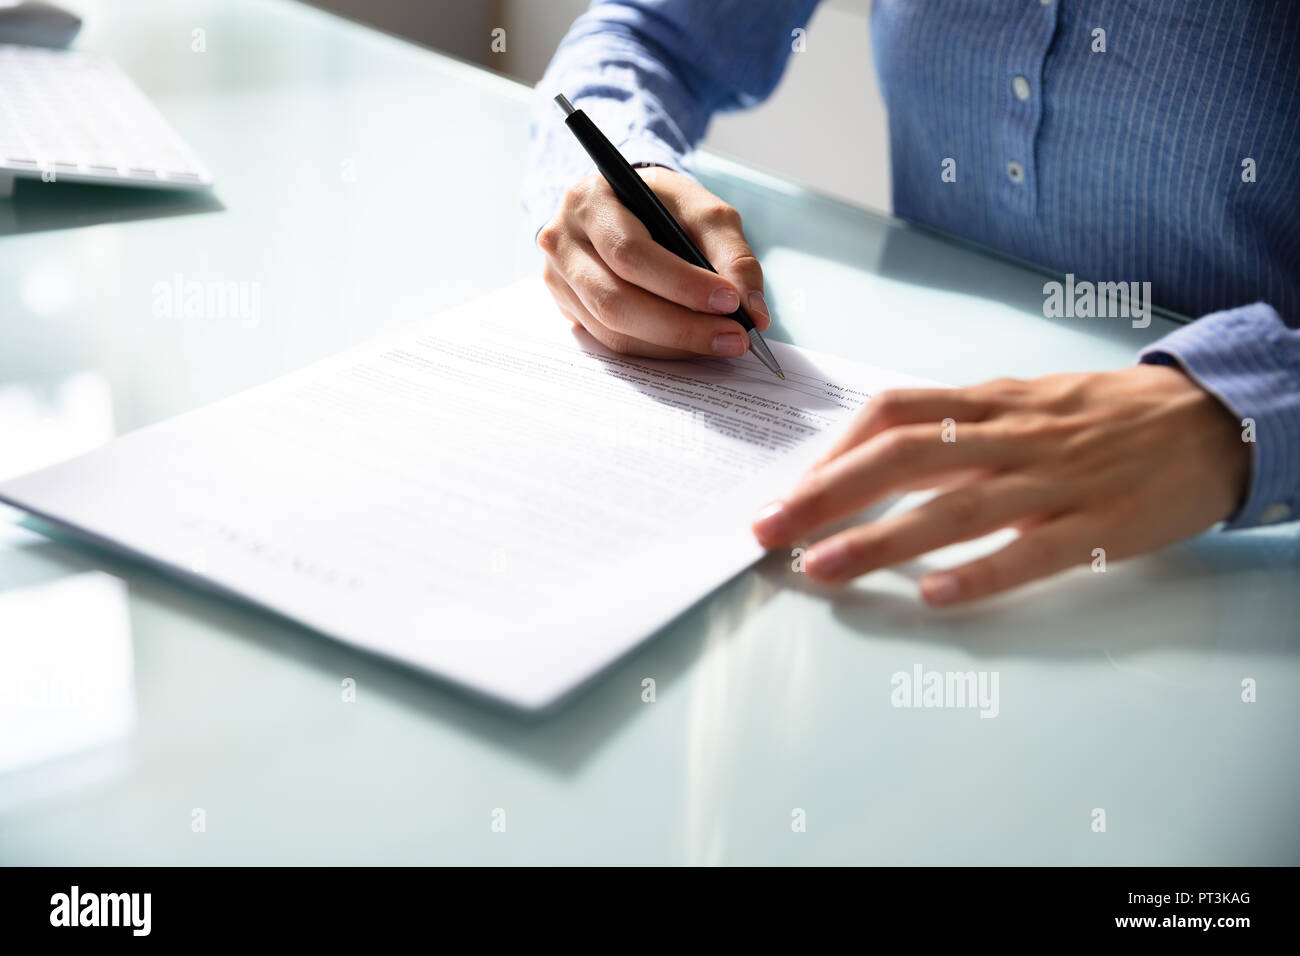 Businesswoman's Hand Signing Contract With Pen Over Desk Stock Photo ...